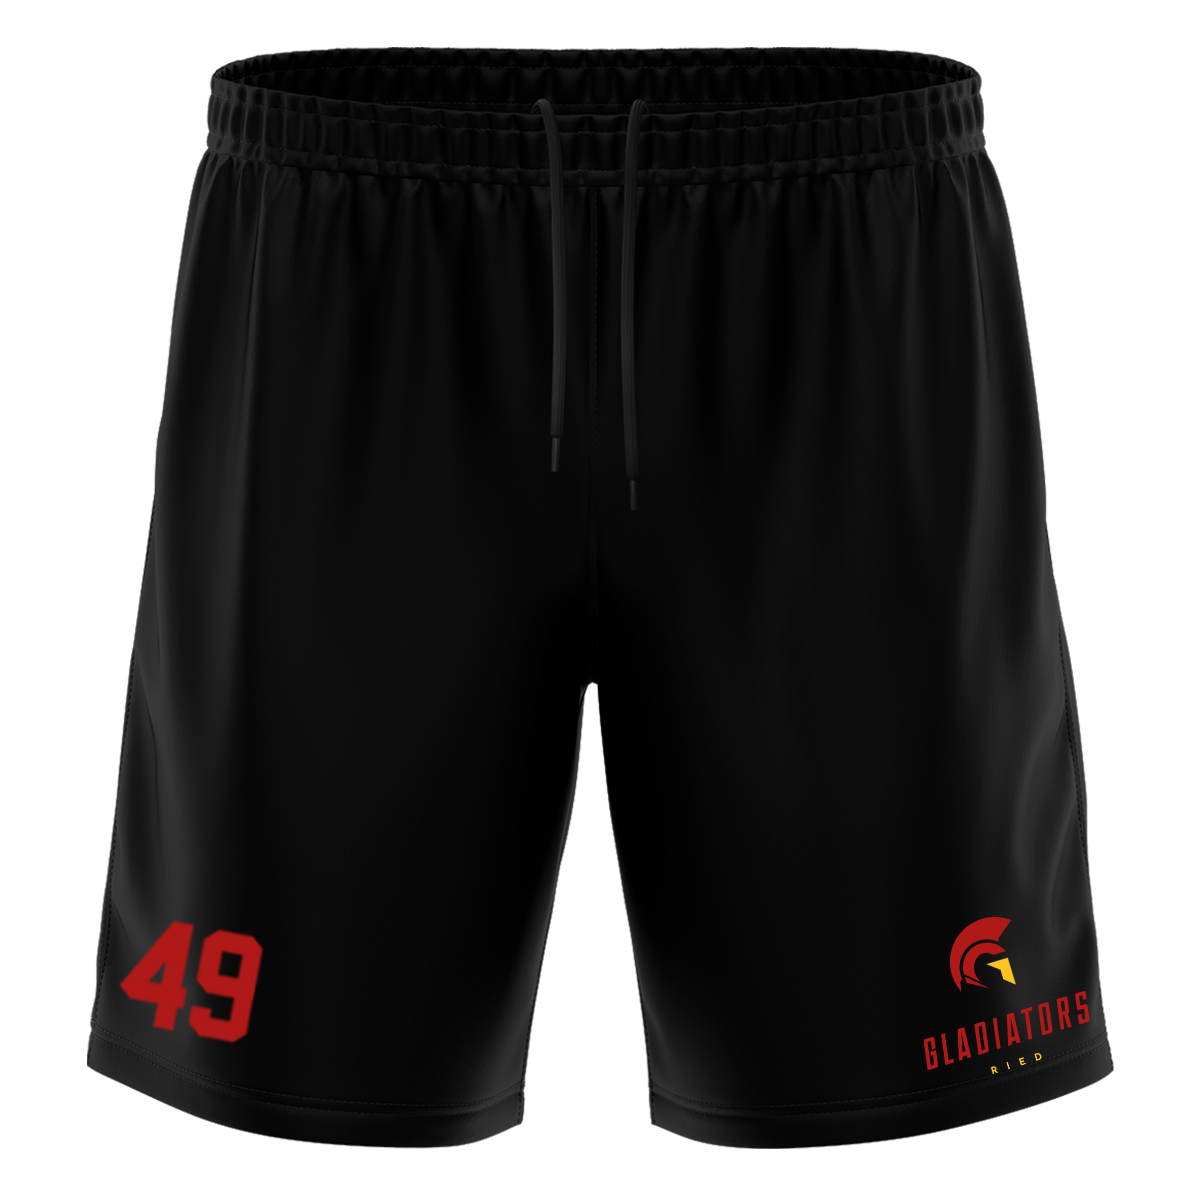 Gladiators Training Short with Playernumber or Initials